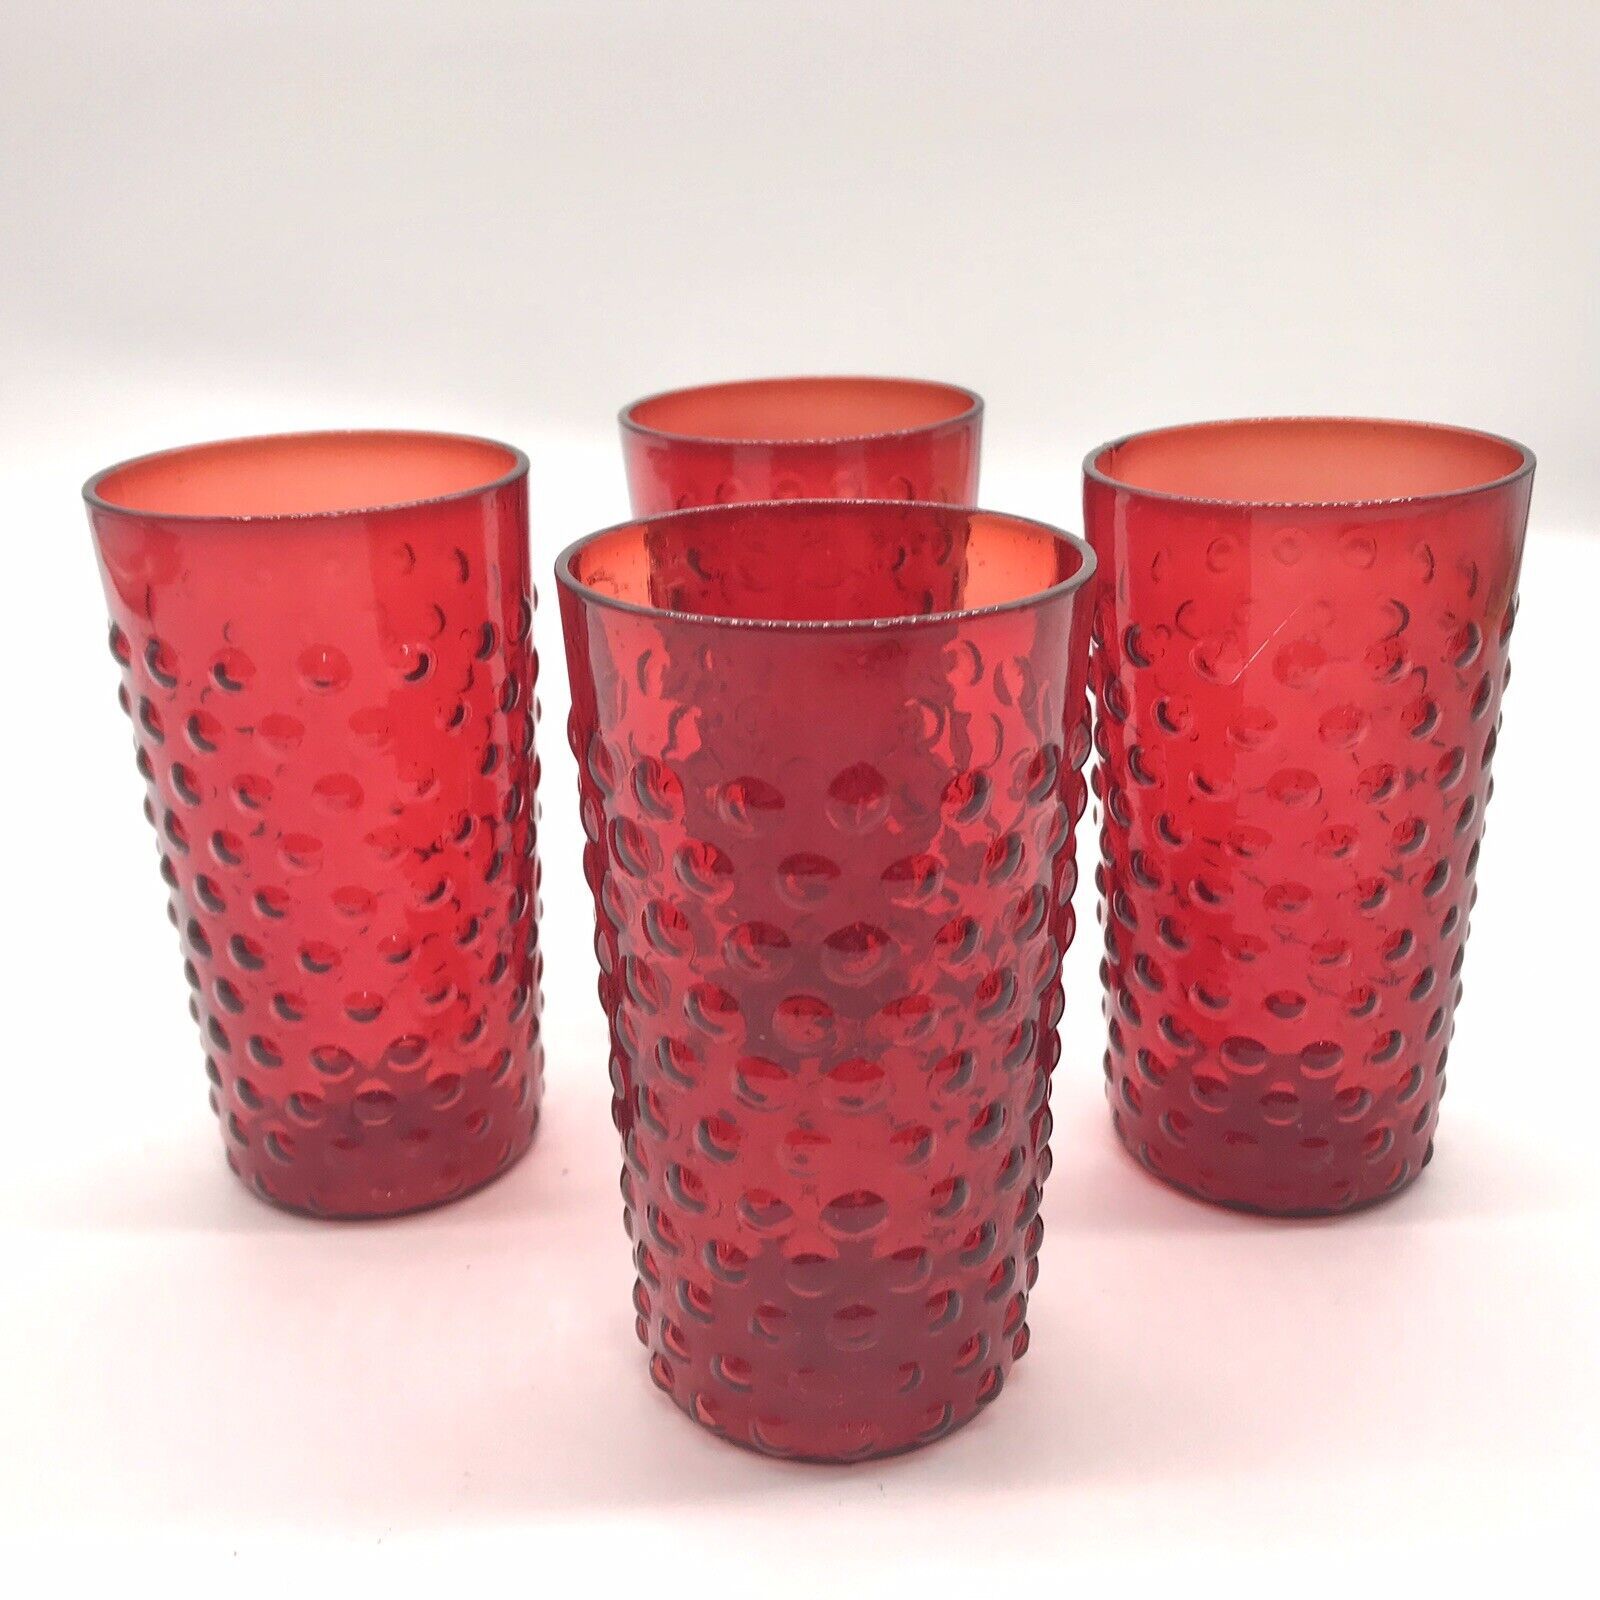 Vintage Ruby Red Hobnail Glasses/Tumblers Anchor Hocking Set of 4 1930's